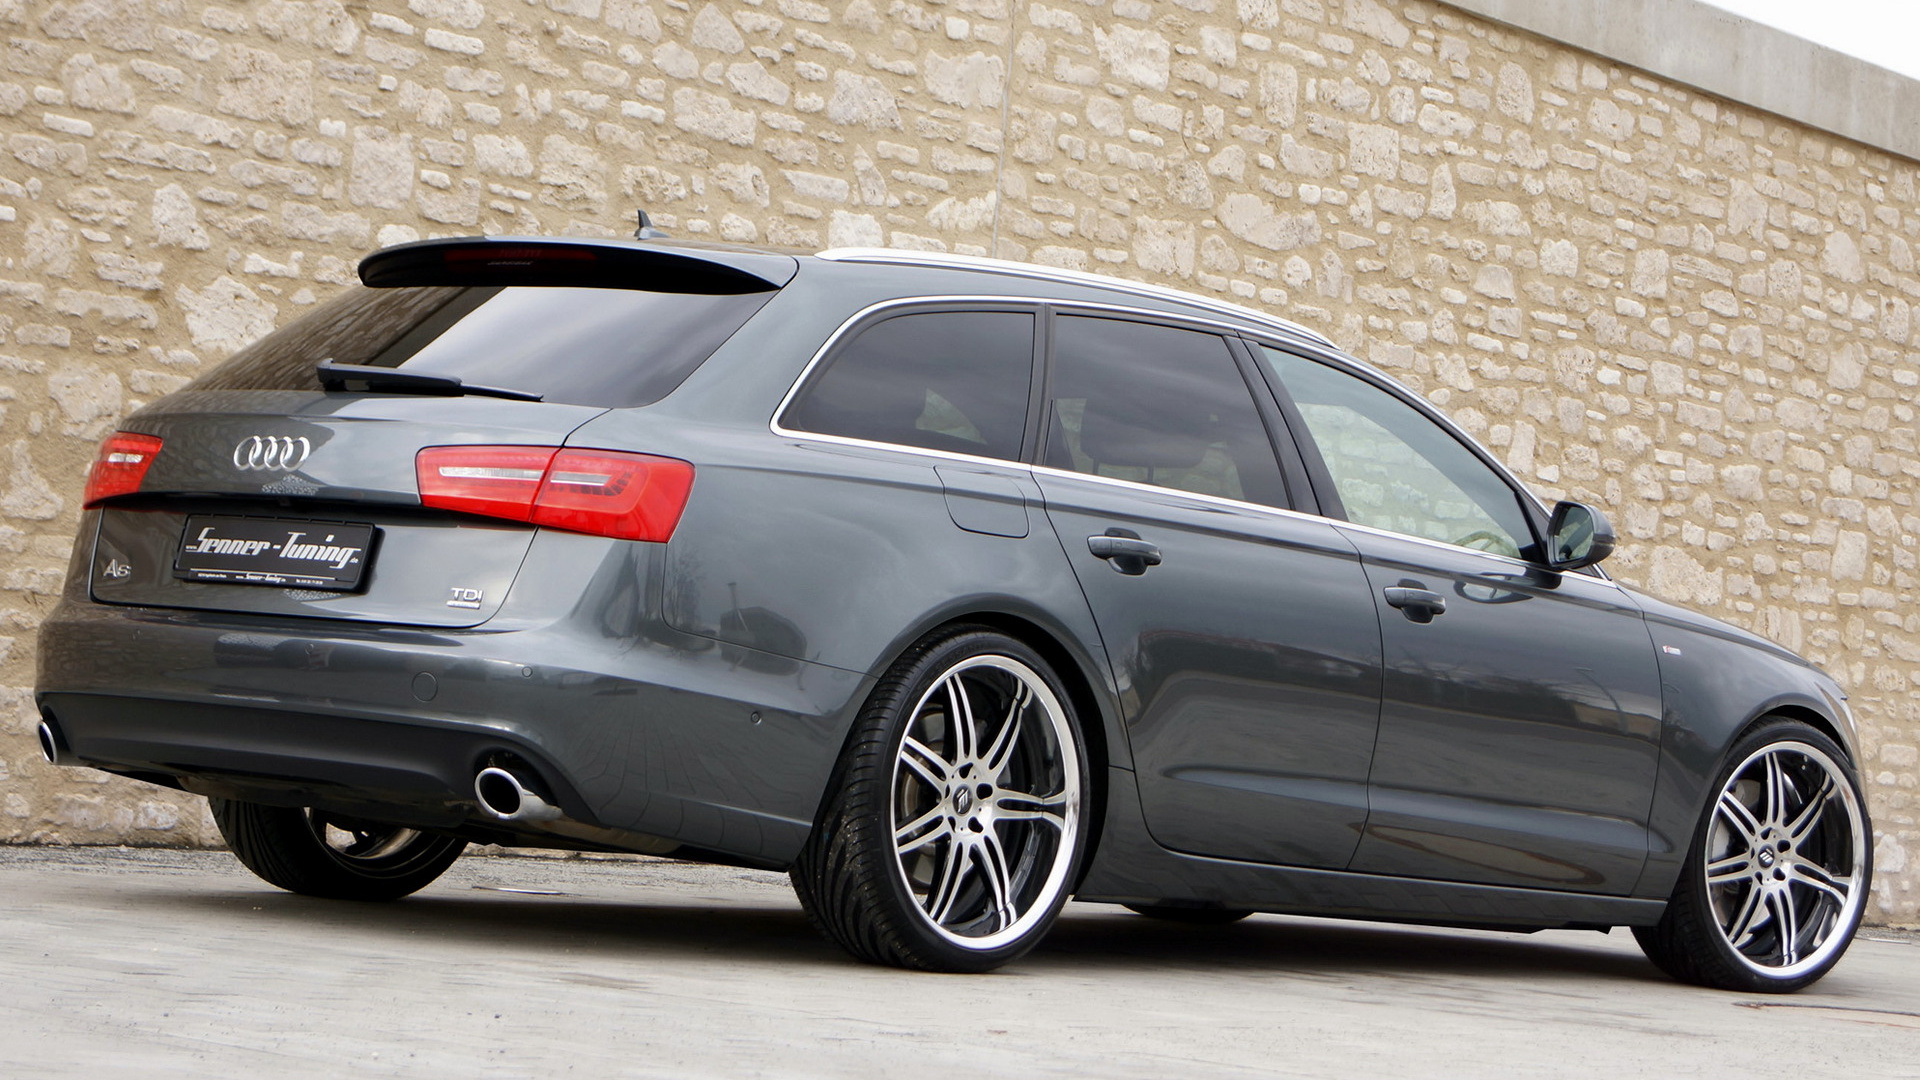 2013 Audi A6 ( 4G ) Avant by Senner Tuning #394579 - Best quality free high  resolution car images - mad4wheels